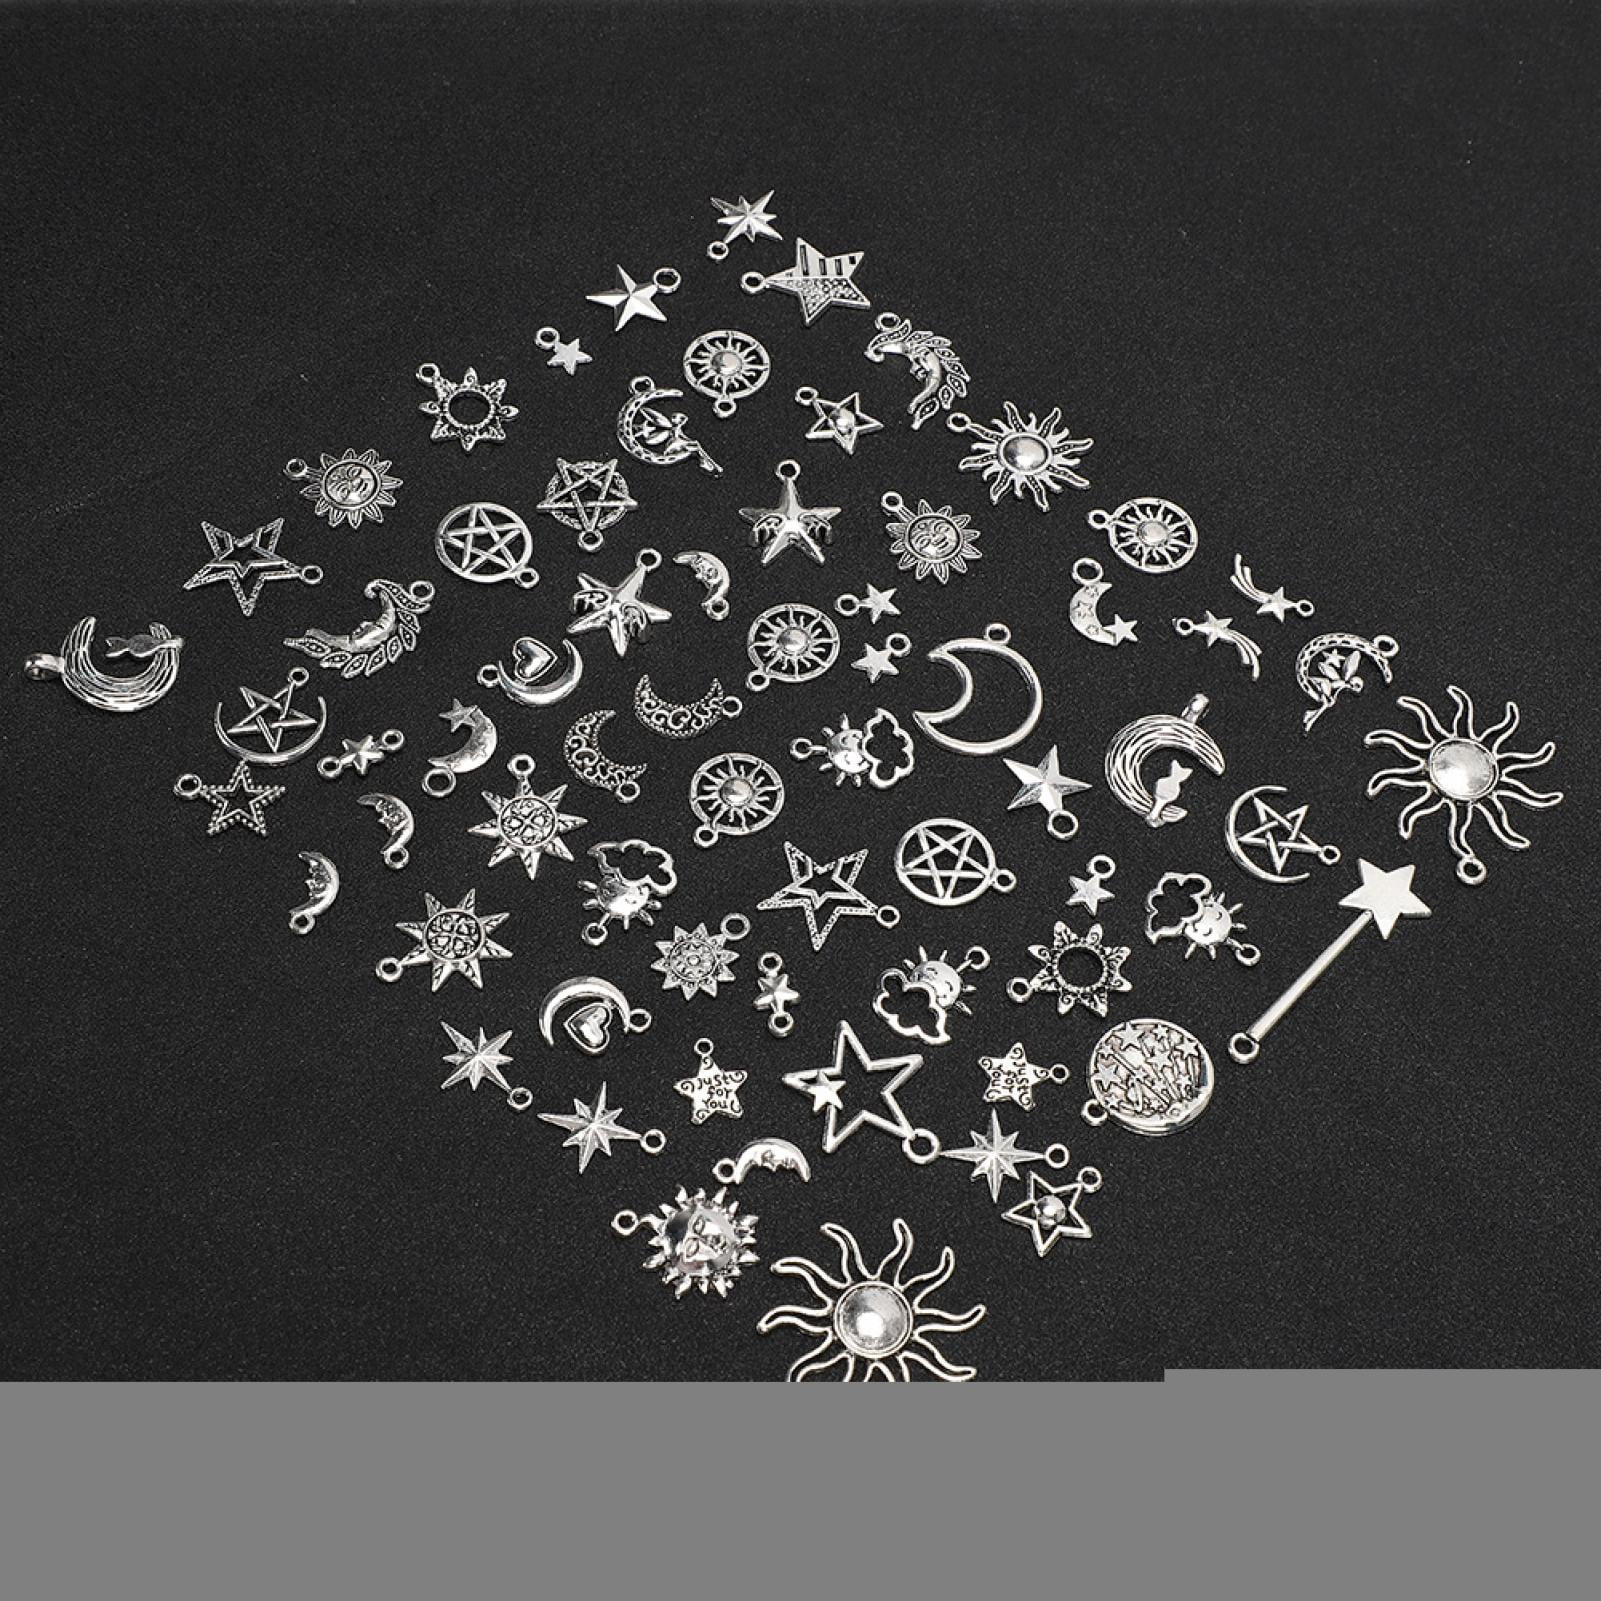 WYSIWYG 10pcs 30x12mm Antique Silver Color Comet Pentagram Star Charms  Pendant For Jewelry Making DIY Jewelry